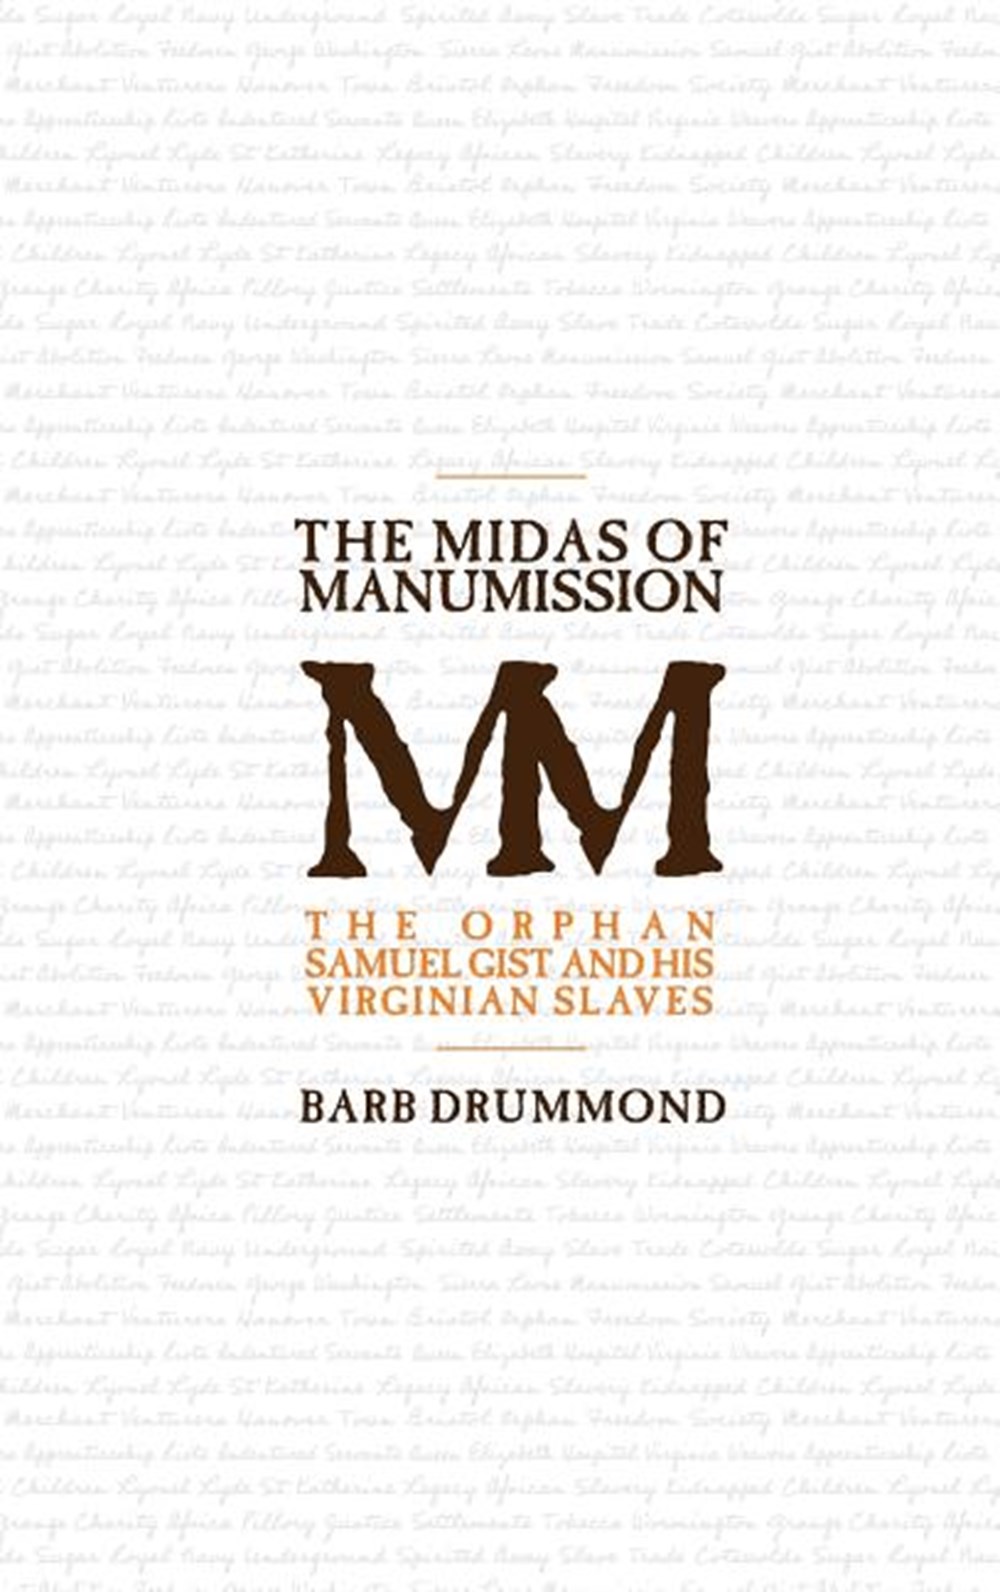 Midas of Manumission The Orphan Samuel Gist and his Virginian Slaves